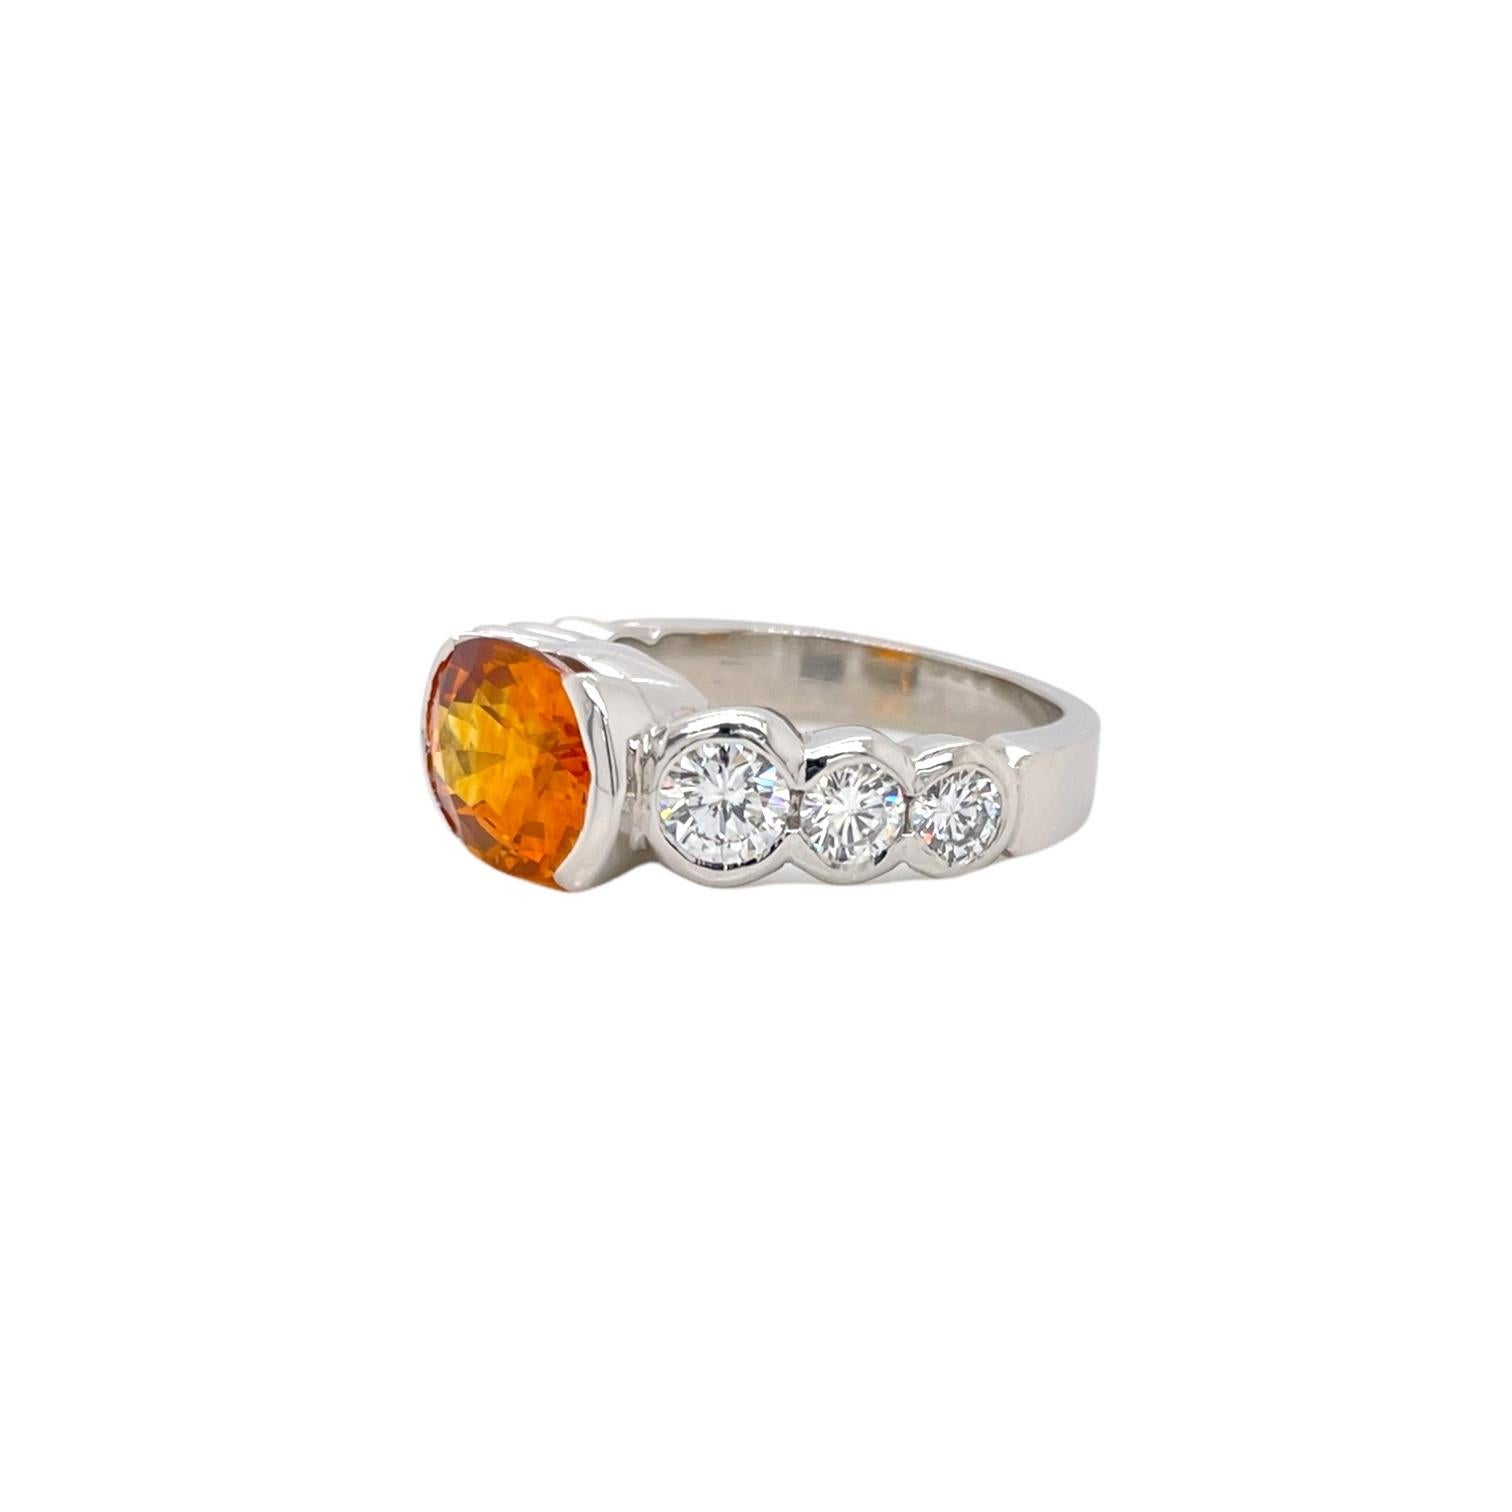 Timeless orange sapphire and diamond ring in 18k white gold. Ring contains 1 center 9x7mm oval orange sapphire set in a half bezel weighing 3.12ct and 6 graduating round brilliant diamonds set in a full bezel weighing 0.91tcw. Diamonds are G in